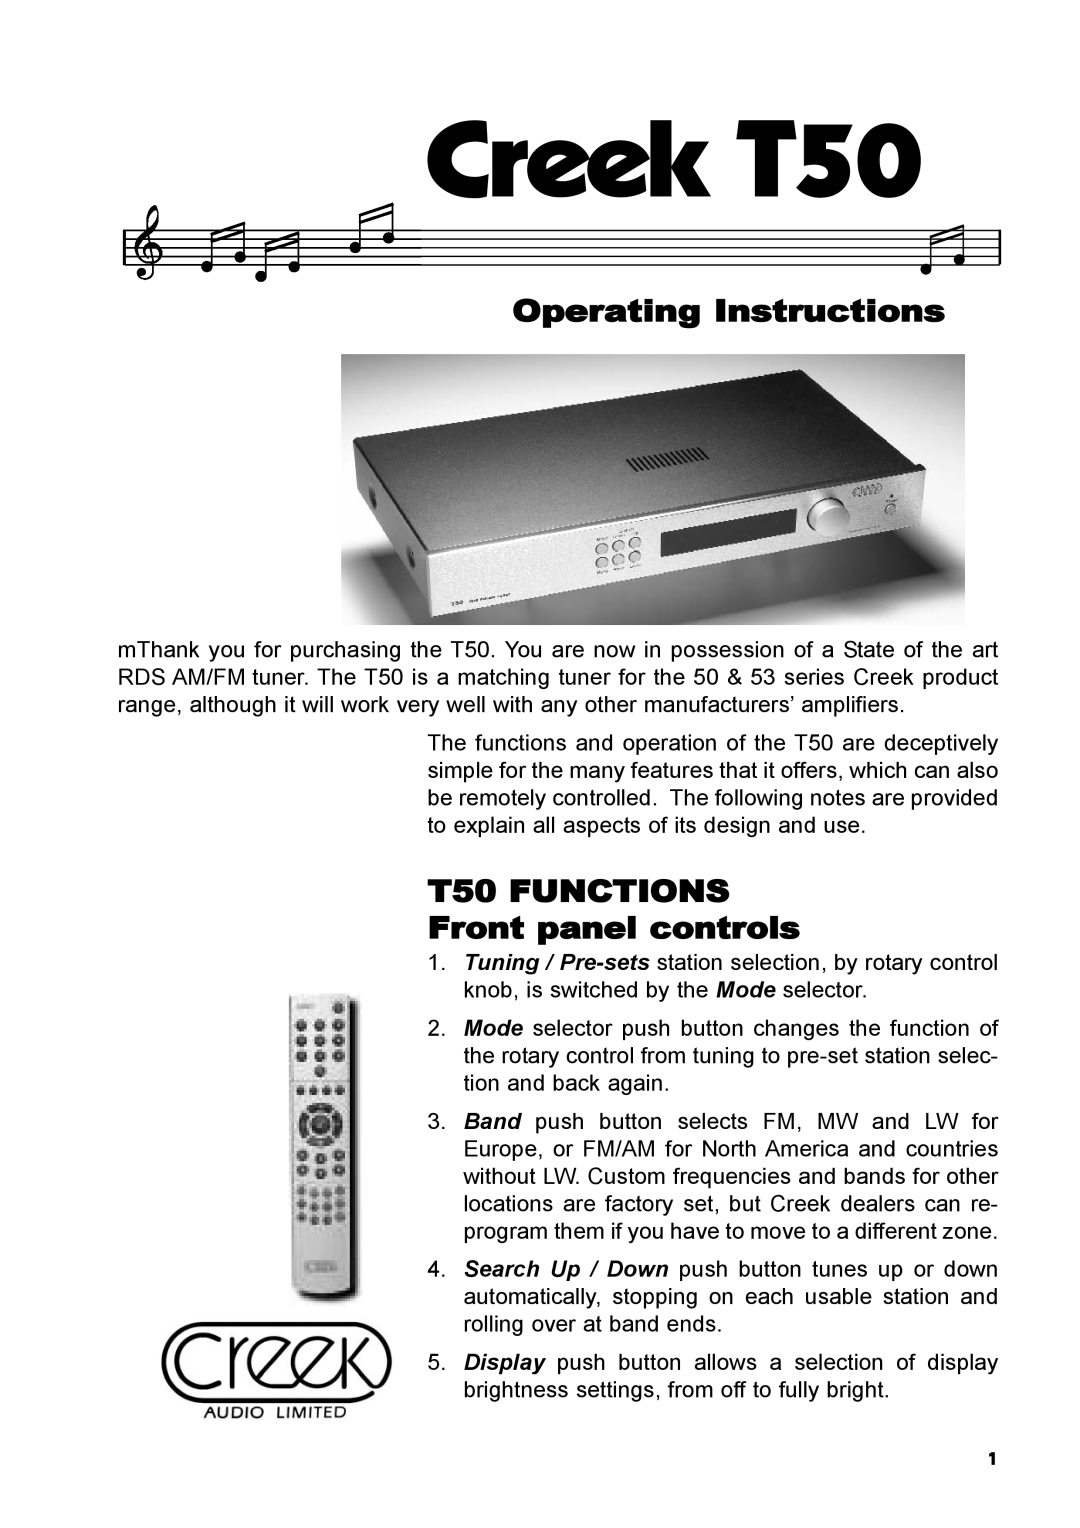 Creek Audio manual Operating Instructions, T50 FUNCTIONS Front panel controls, Creek T50 